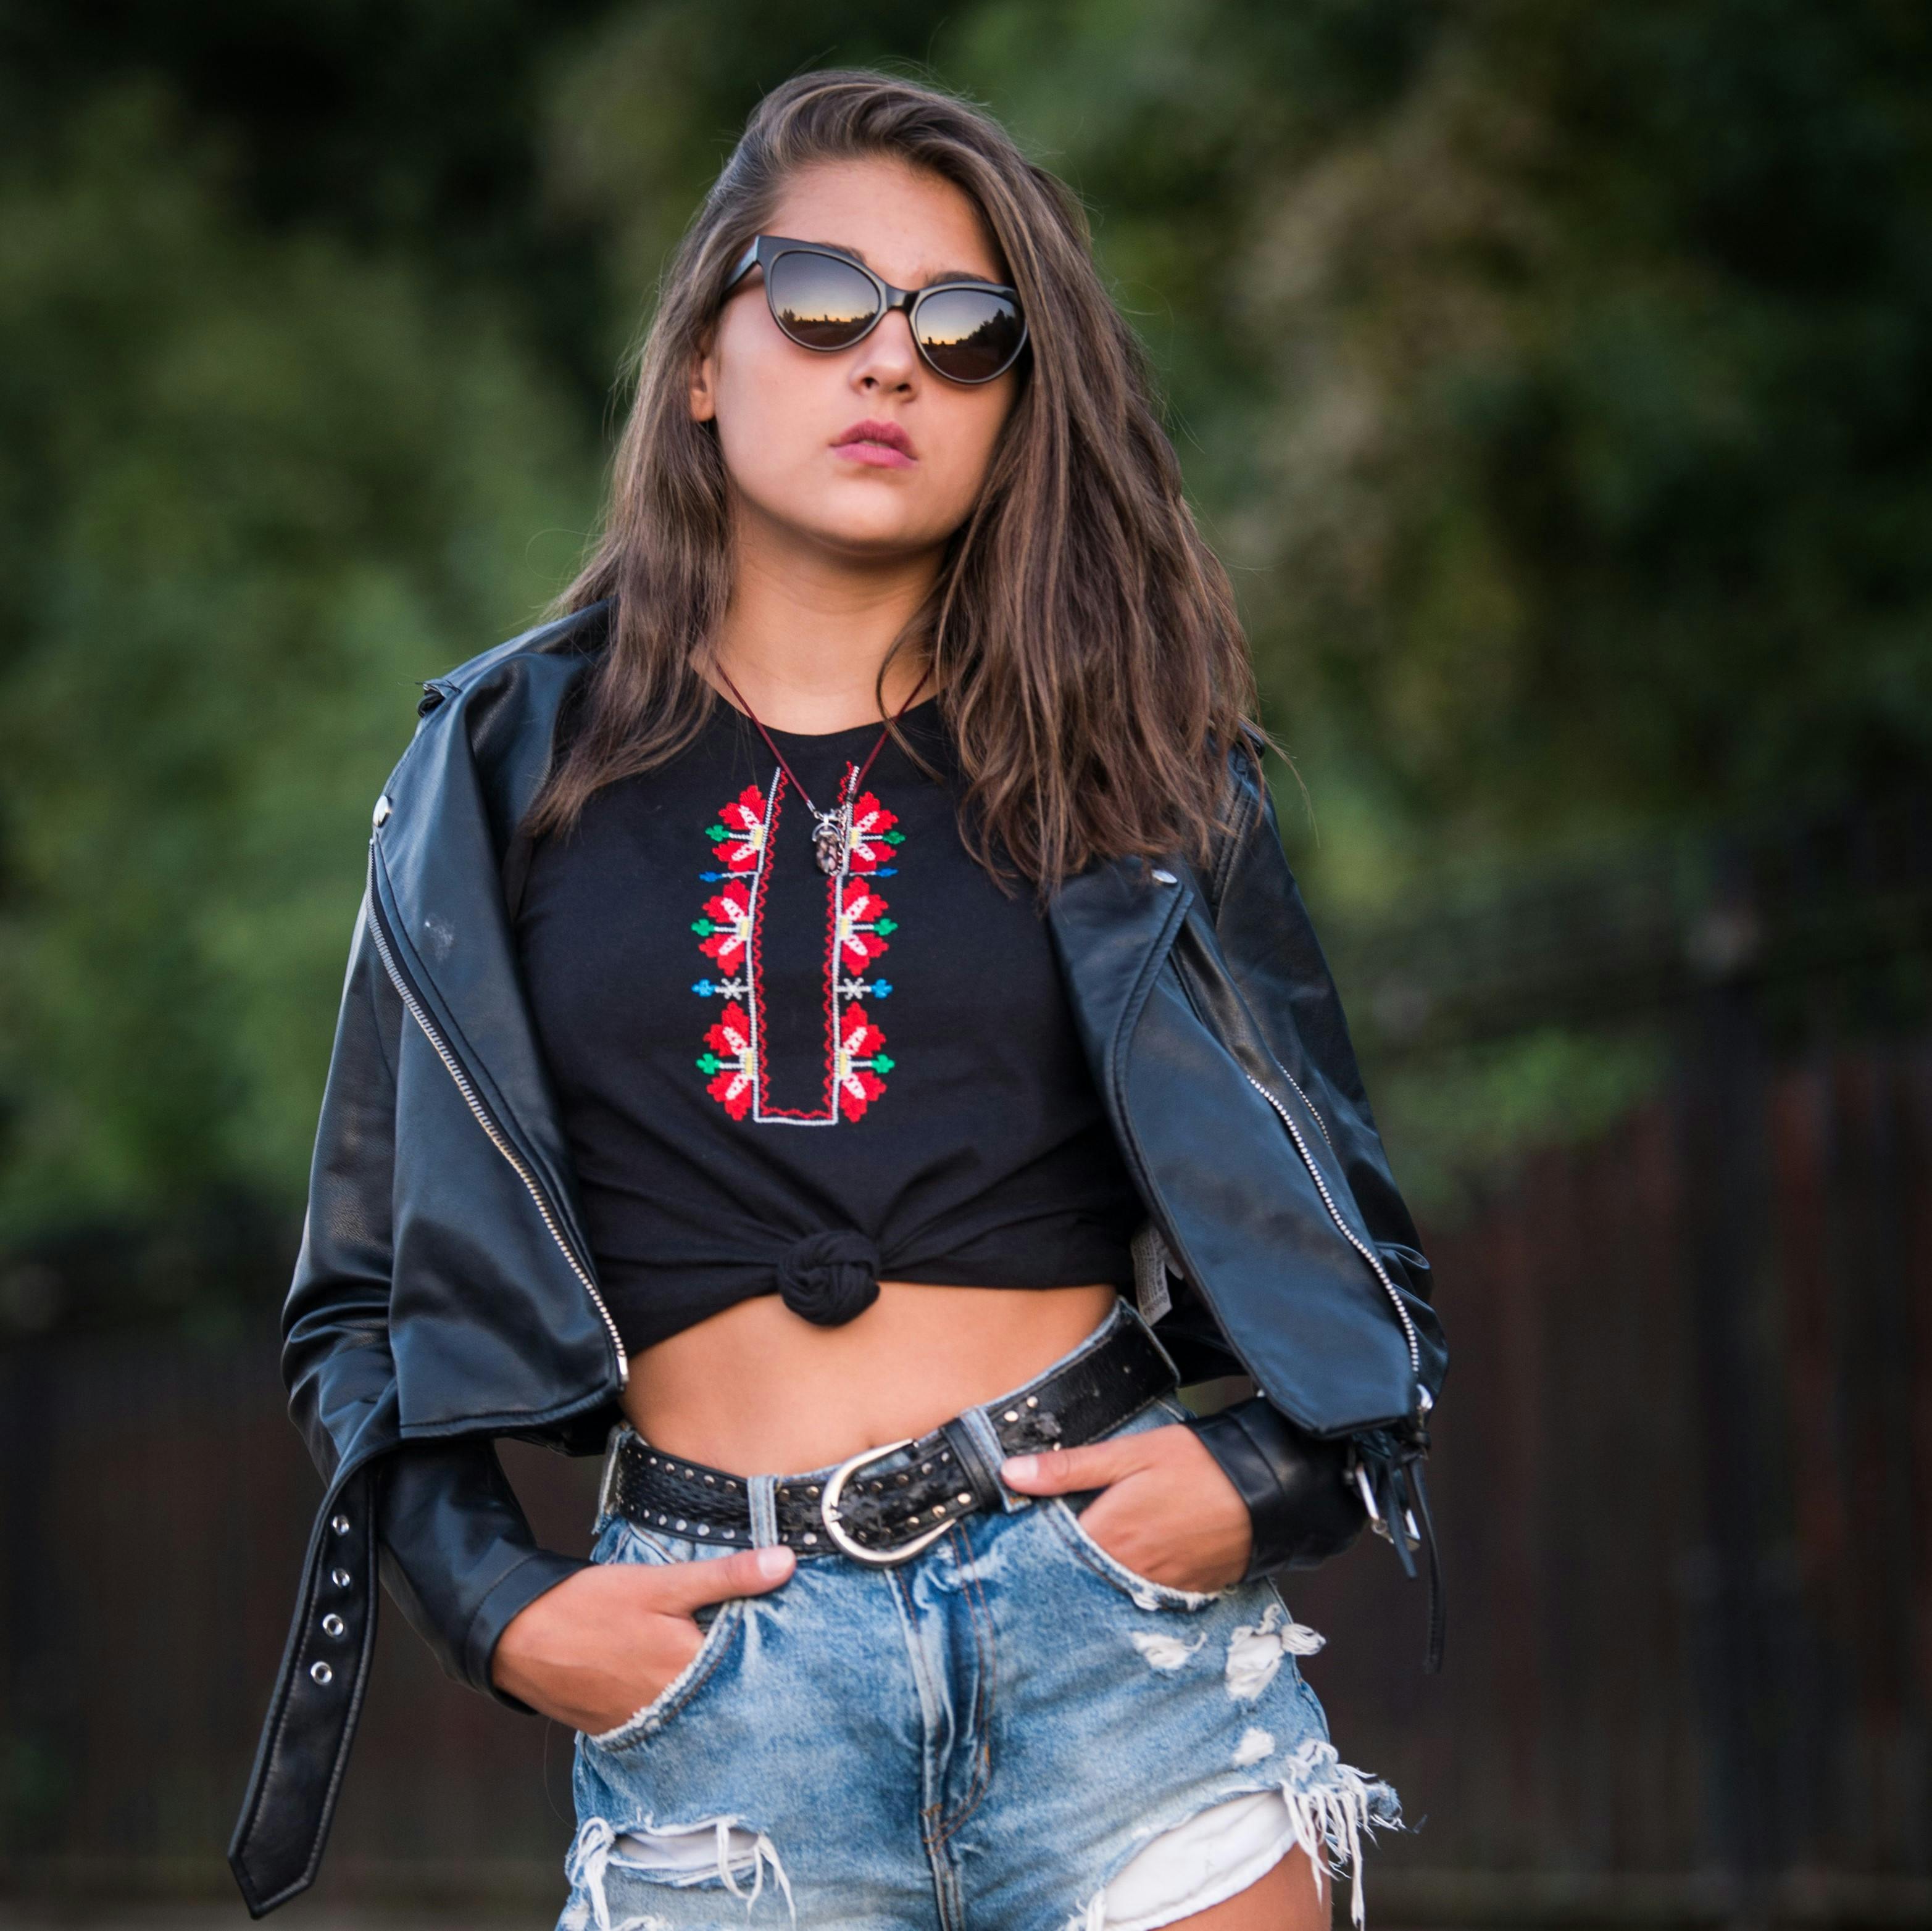 Brunette Woman in Leather Jacket and Denim Mini Shorts Posing by a  Motorcycle · Free Stock Photo